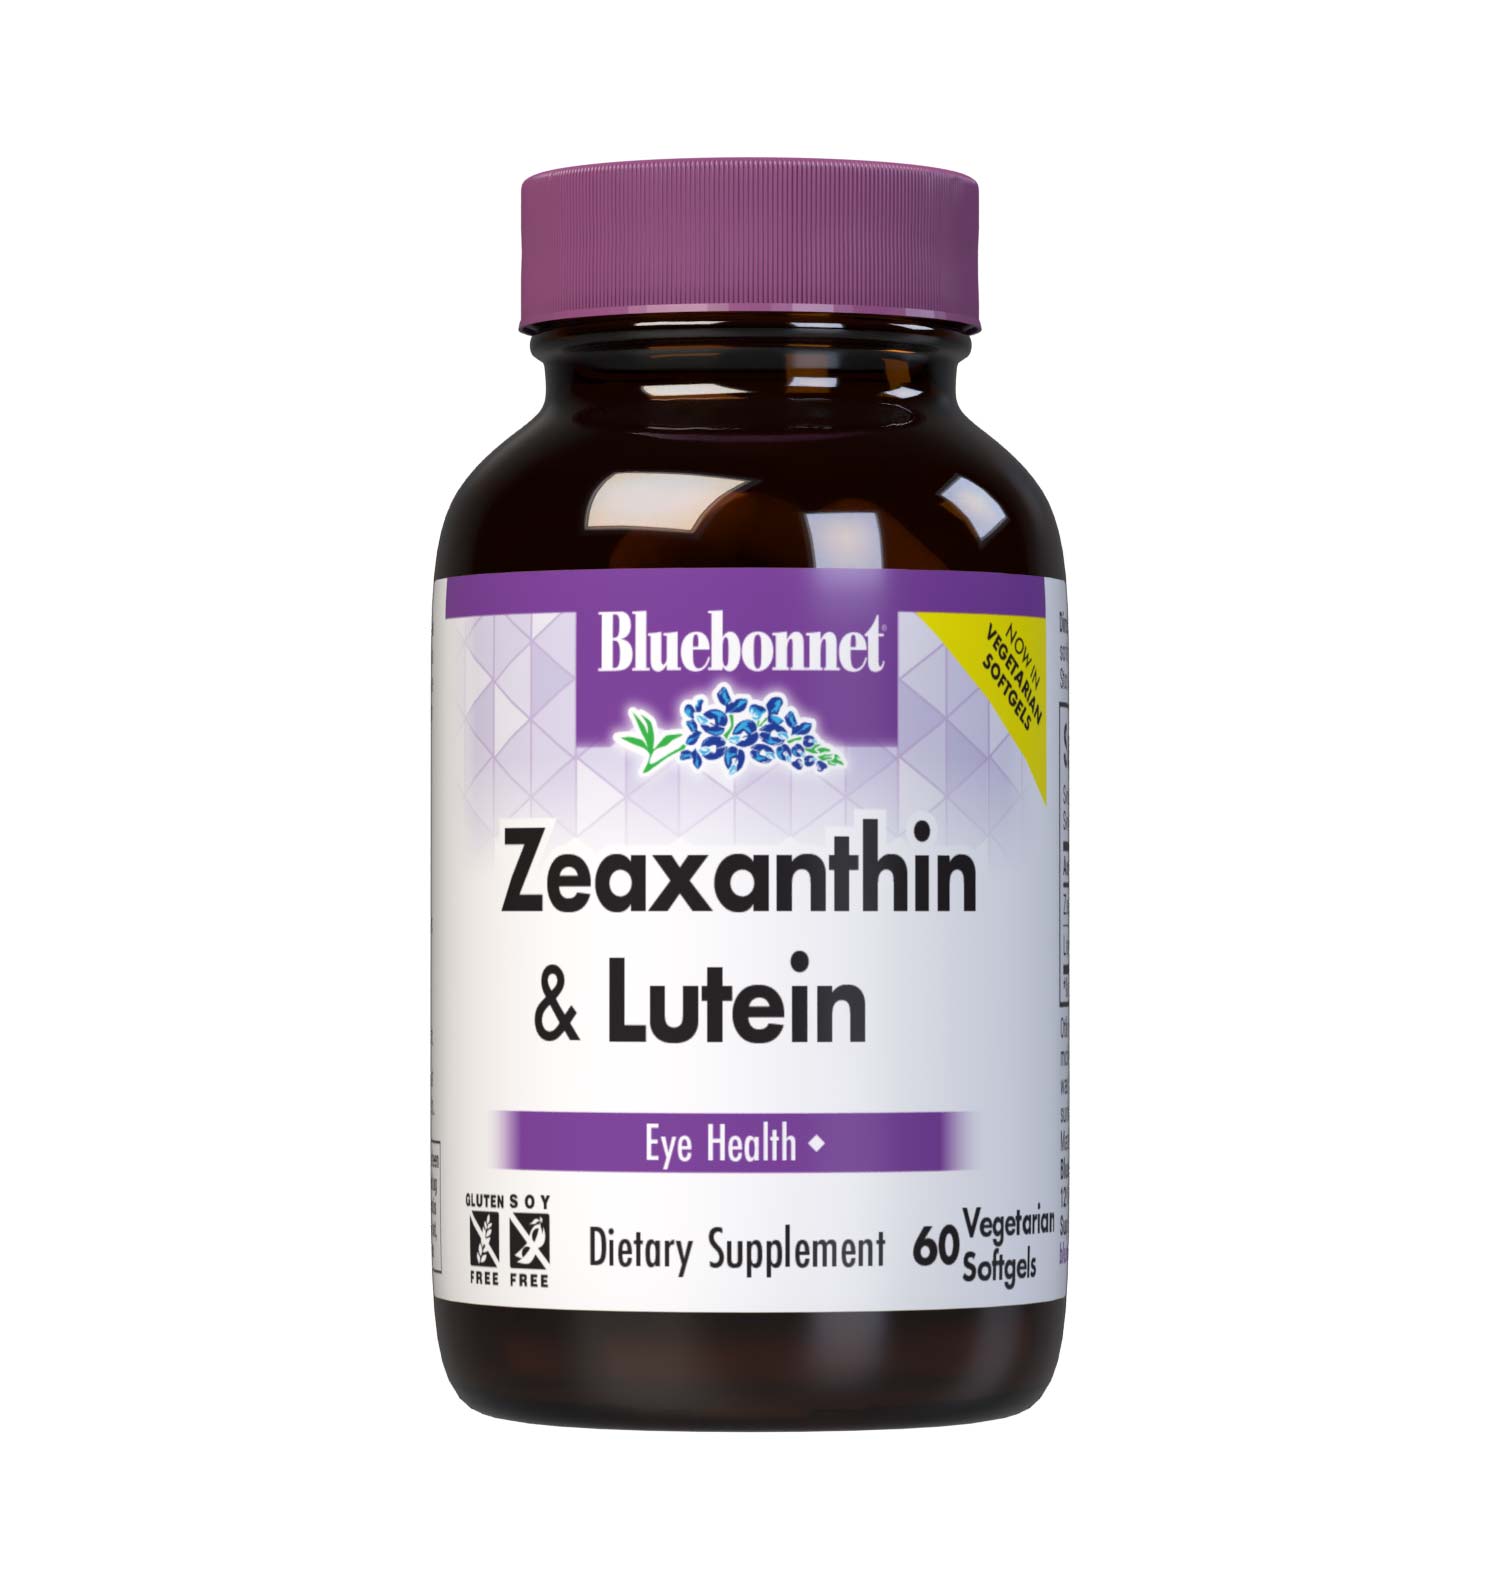 Bluebonnet’s Zeaxanthin & Lutein 60 Softgels are formulated with zeaxanthin and lutein from paprika and marigold flower extracts. Zeaxanthin and lutein are carotenoids that serve as potent nutrients to support optimal eye health. #size_60 count